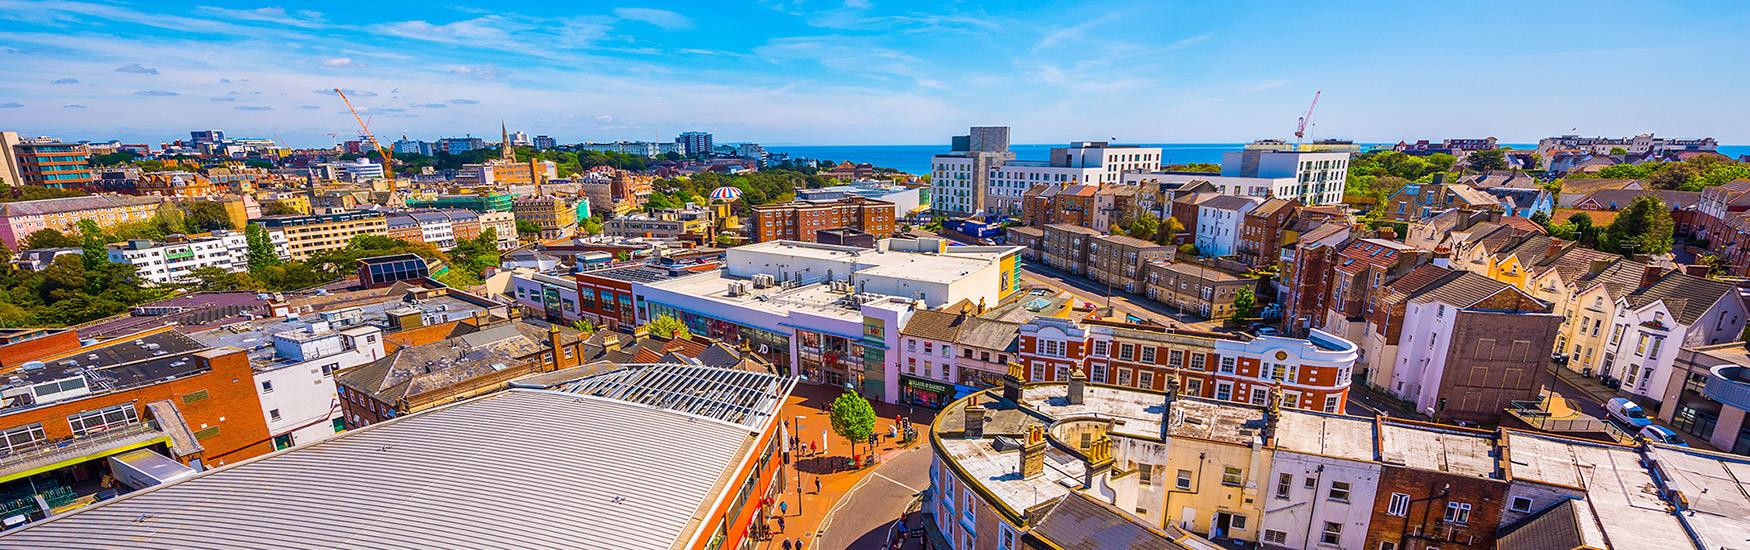 Beautiful shot of Bournemouth town centre taken from an elevated position show casing the destination